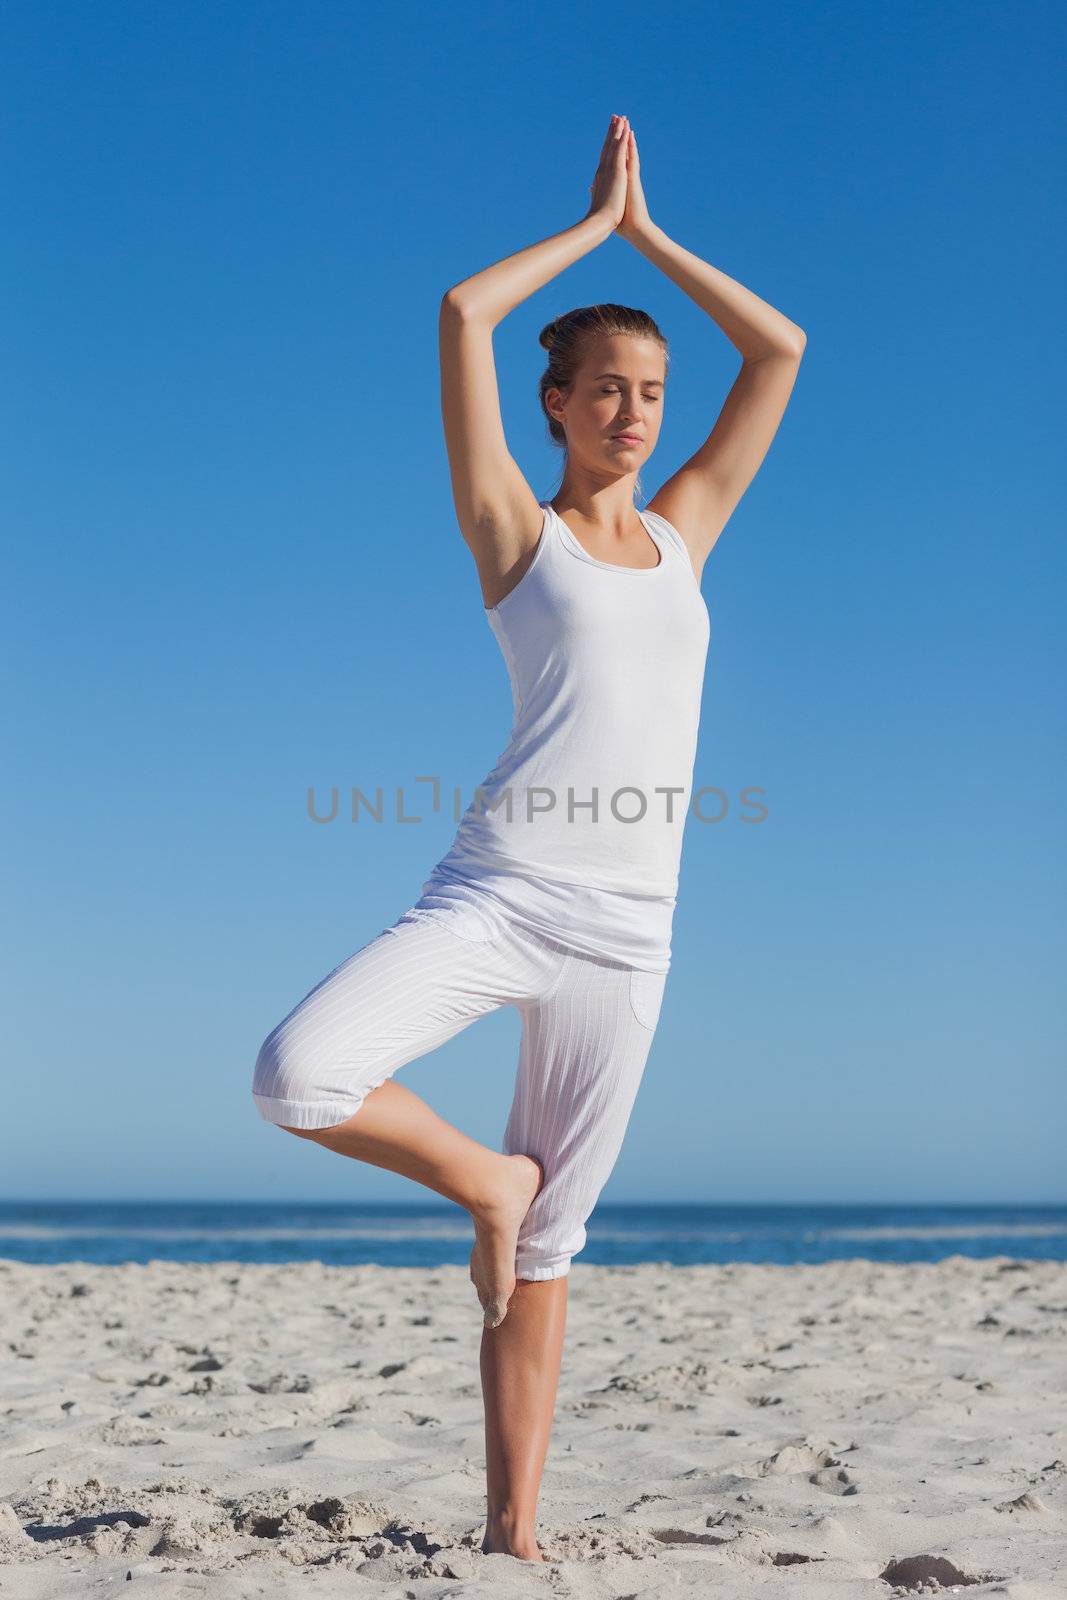 Woman in tree yoga pose at beach on a sunny day